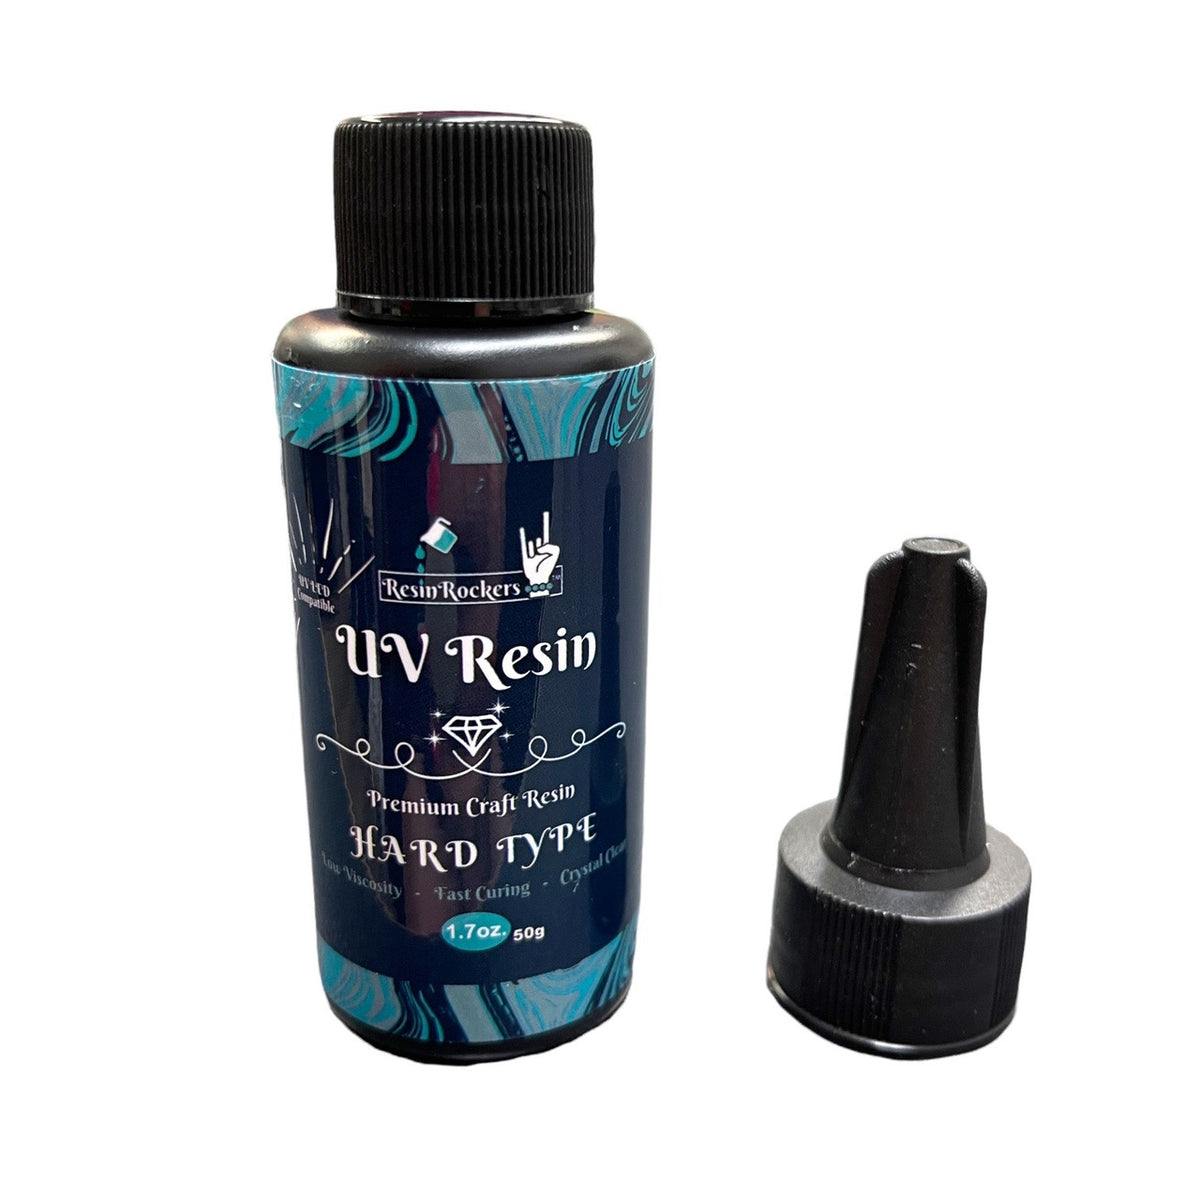 UV Resin Original Crystal Clear Hard Type Ultra Fast Curing